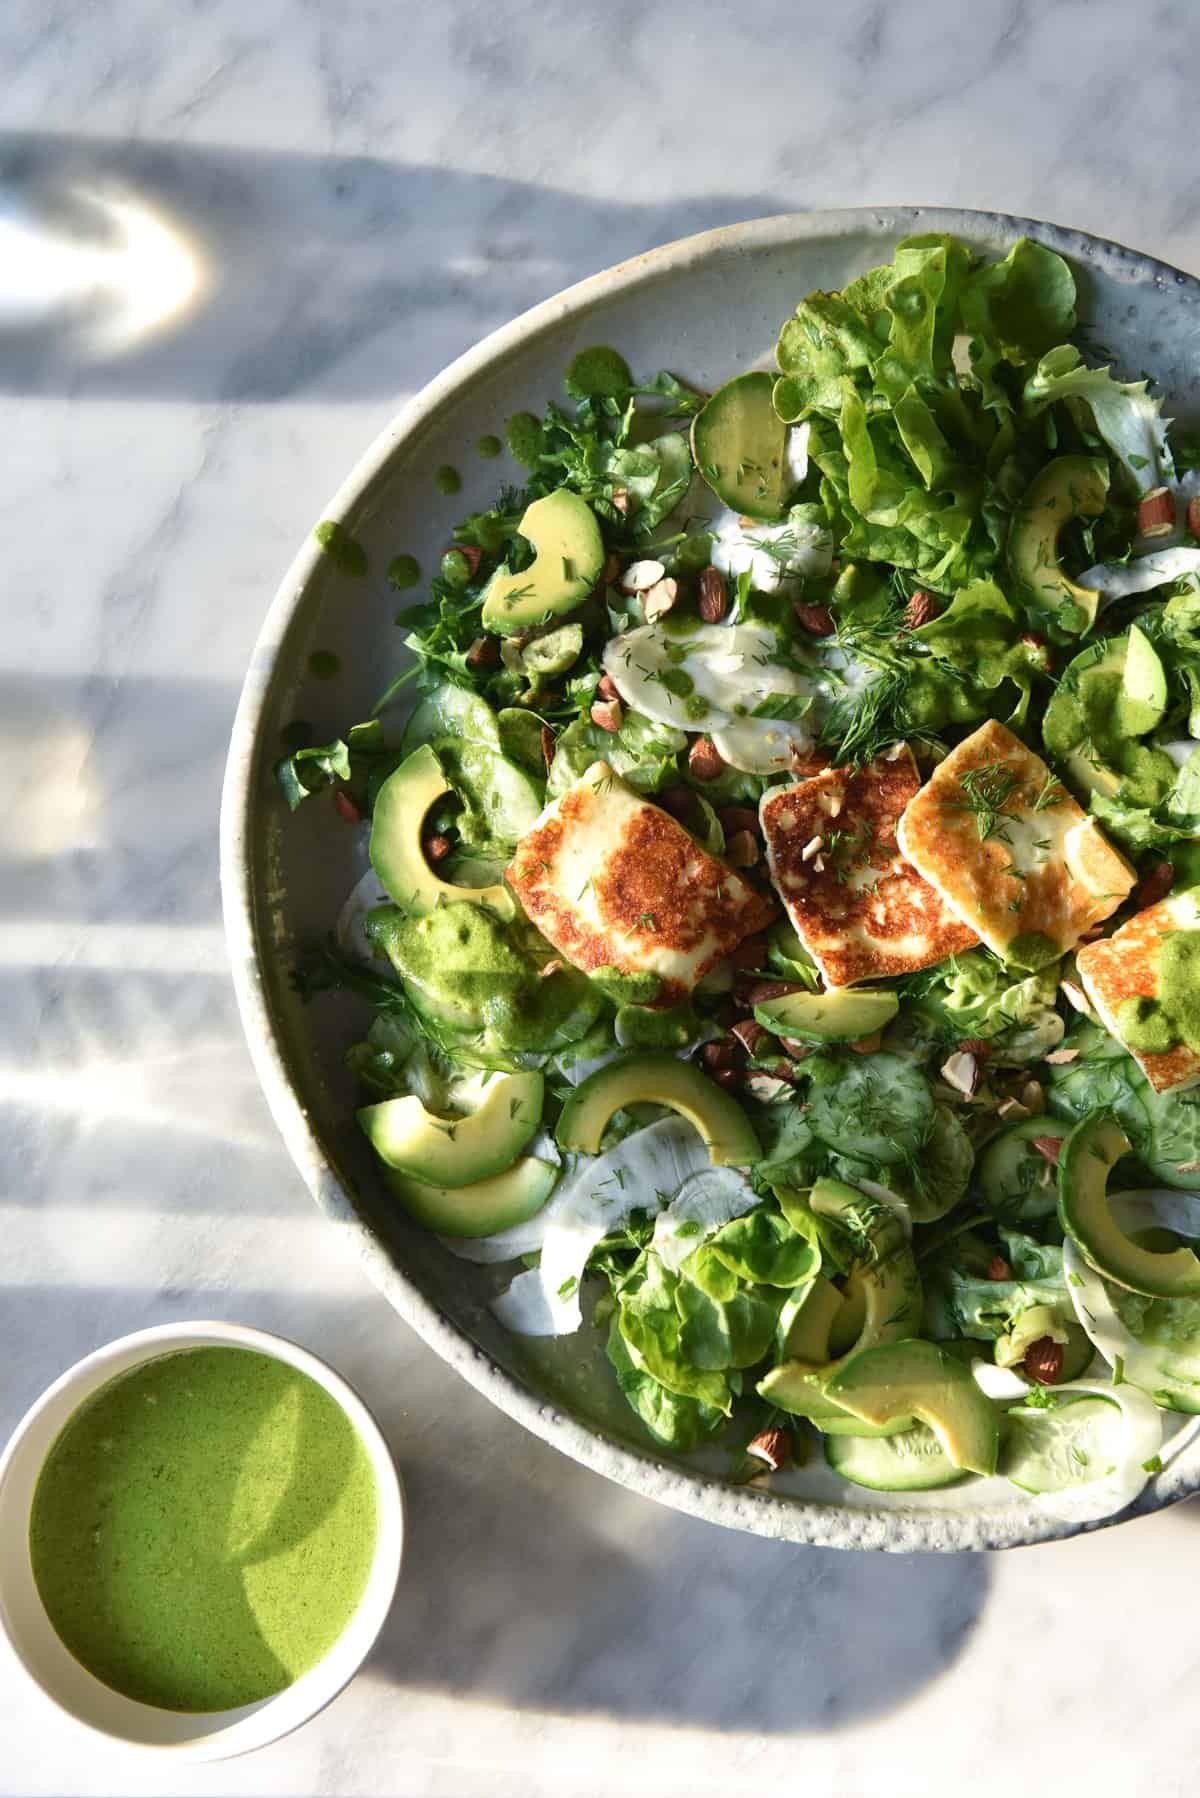 Green haloumi salad with toasted almonds, avo and dairy free pesto from www.georgeats.com | @georgeats